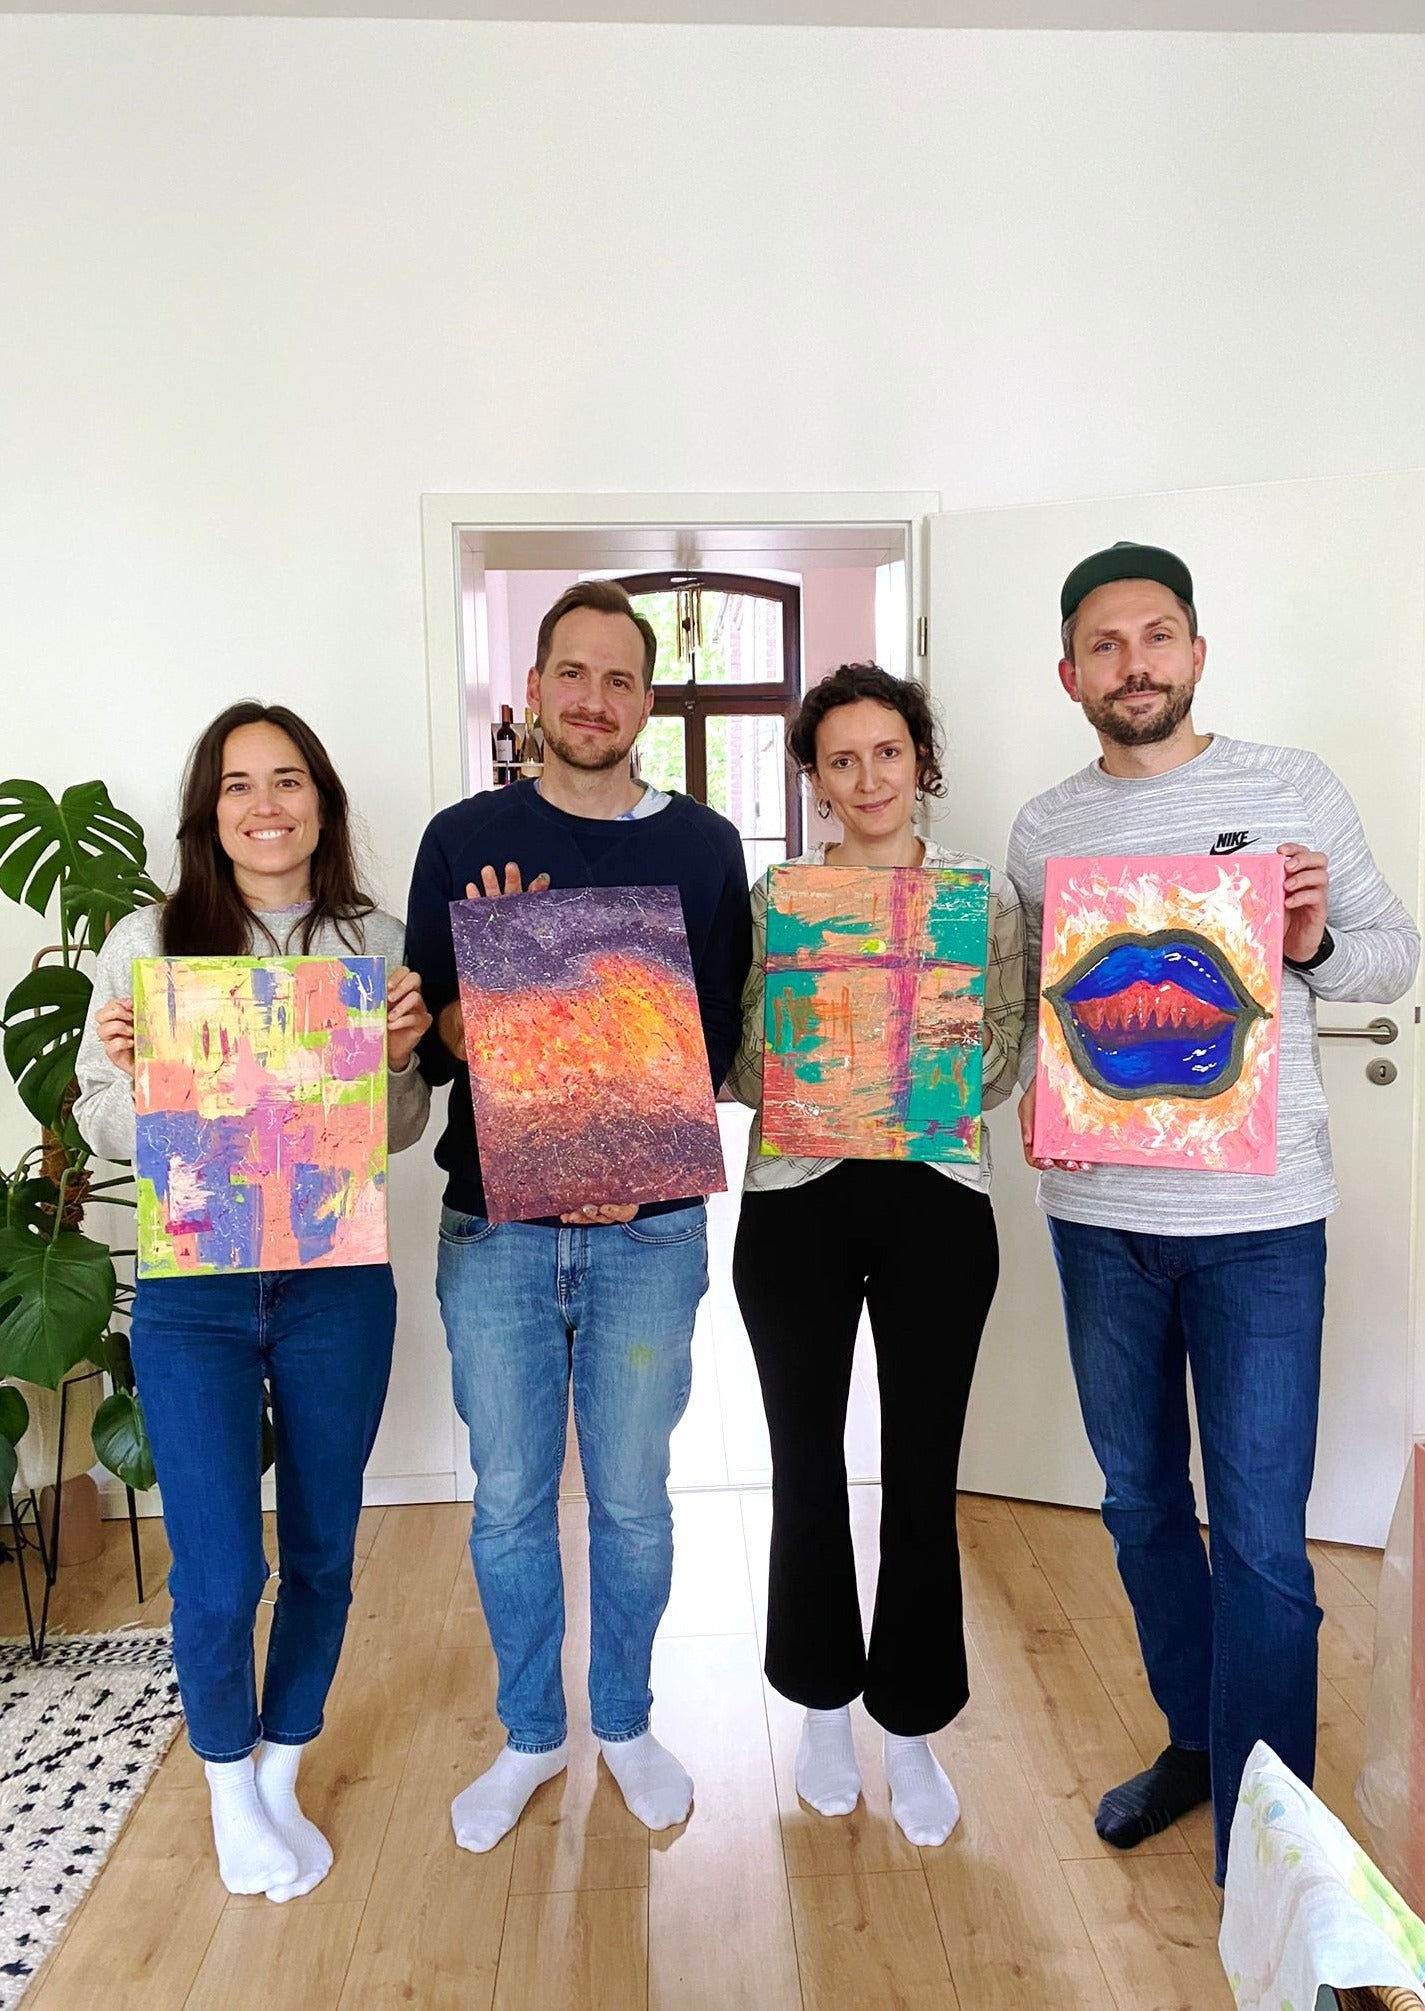 Painting Workshop "The World of Colors" with Mara in Cologne, Germany